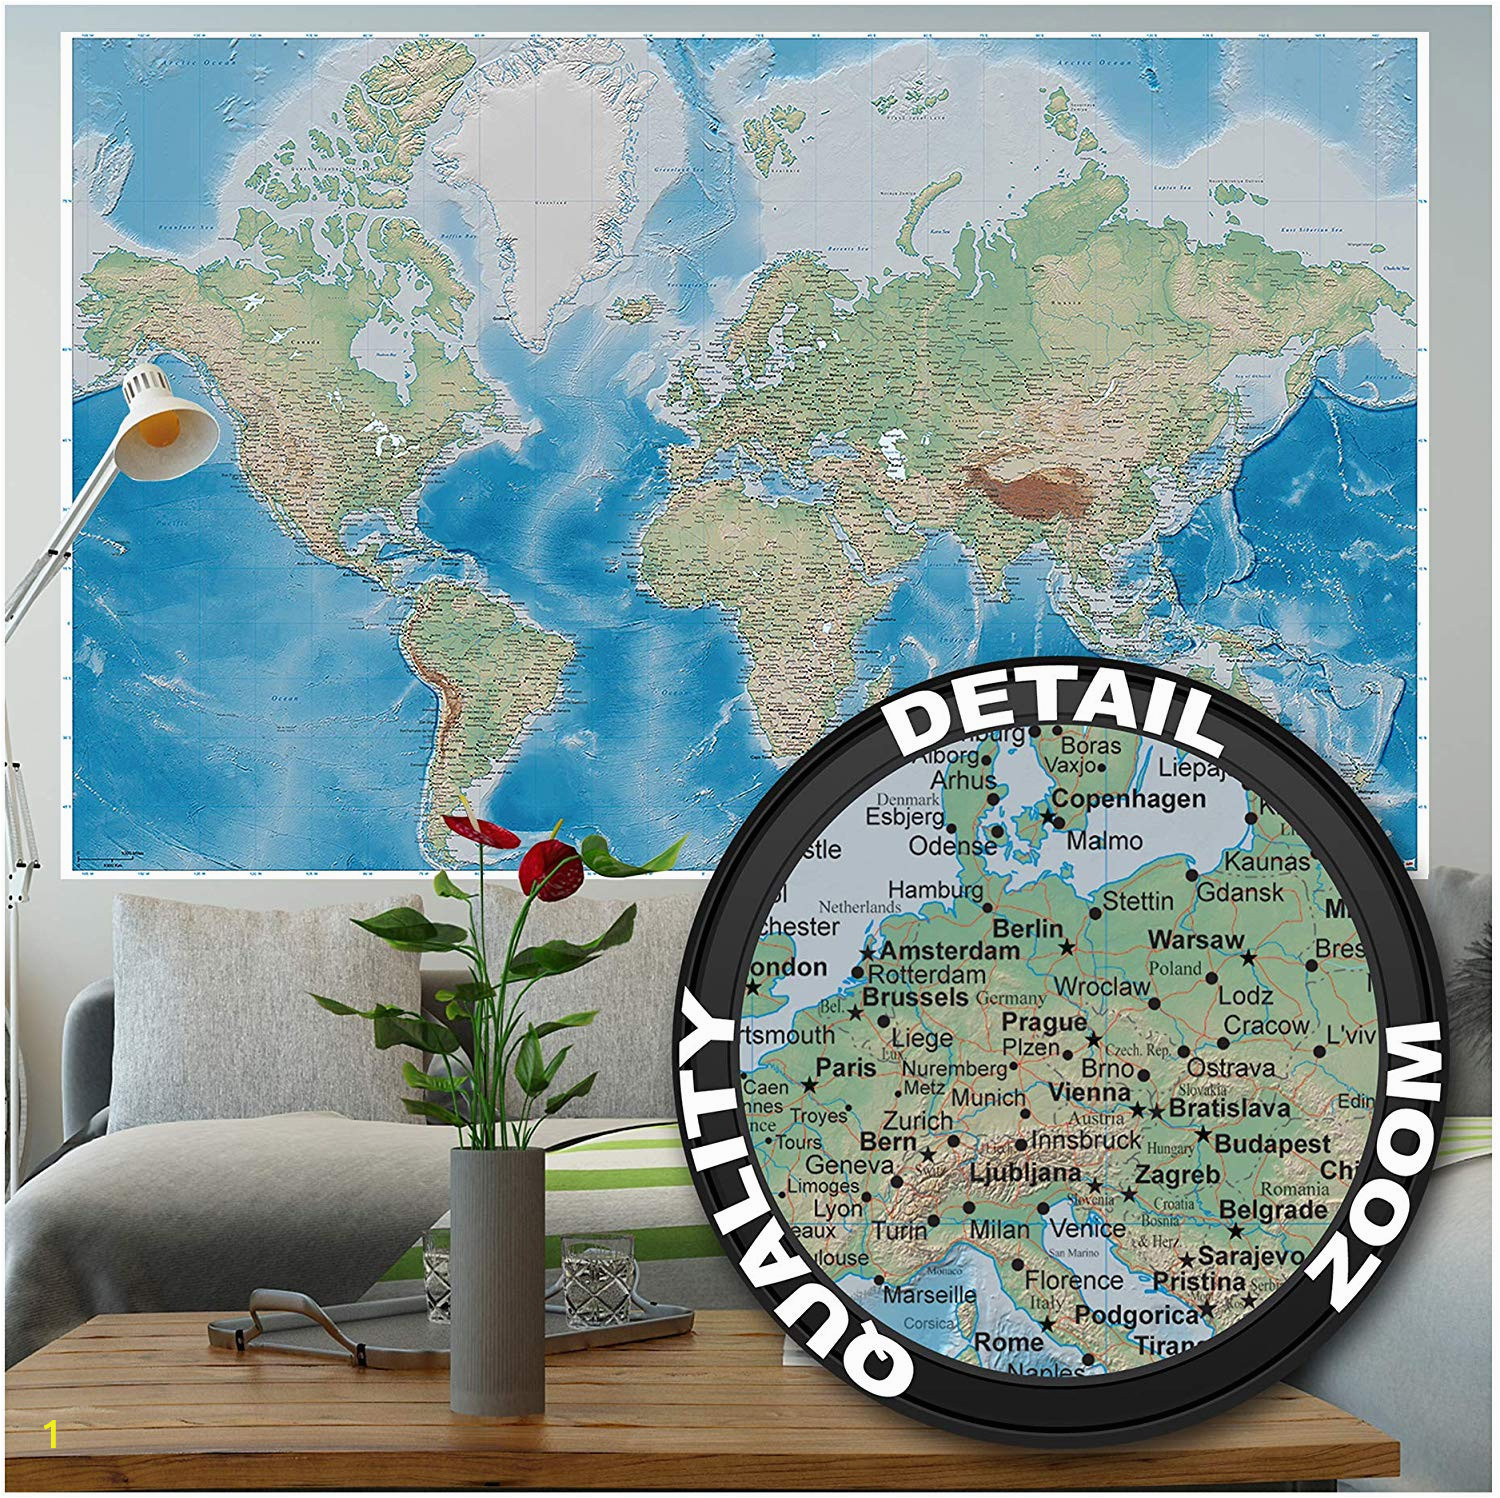 Planet Earth Wall Mural Mural – World Map – Wall Picture Decoration Miller Projection In Plastically Relief Design Earth atlas Globe Wallposter Poster Decor 82 7 X 55